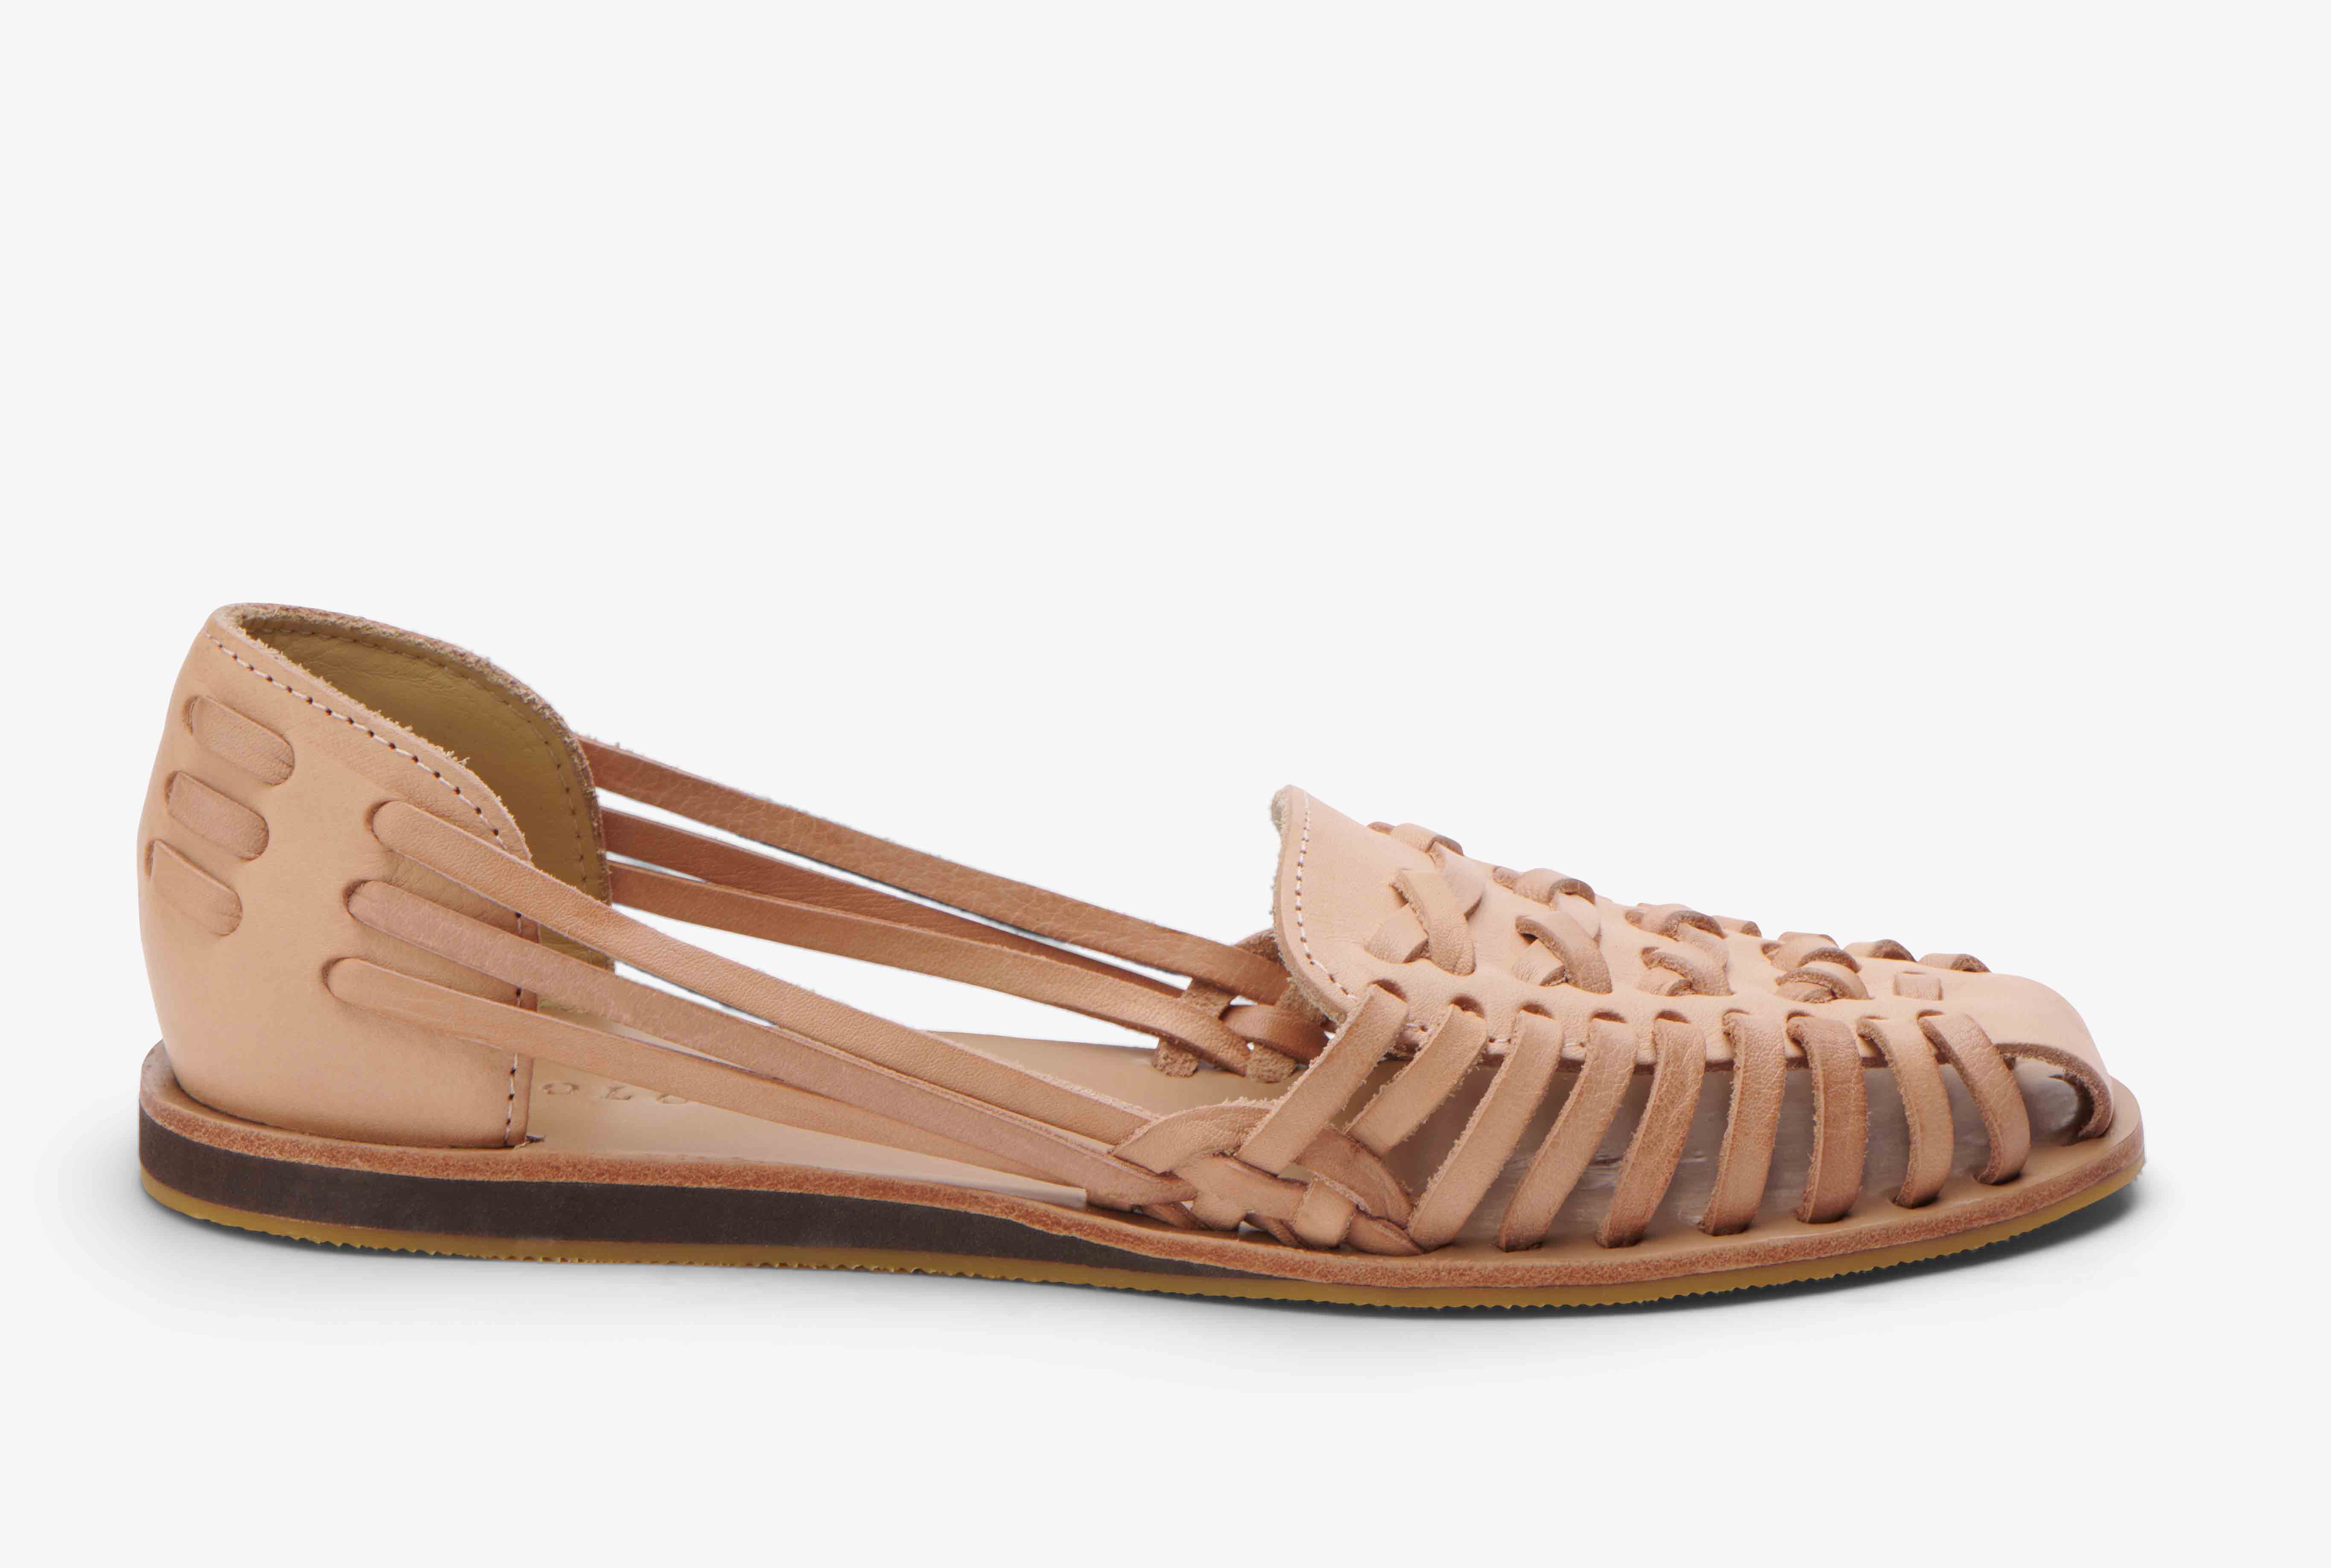 Nisolo Women's Huarache Sandal Natural Vachetta - Every Nisolo product is built on the foundation of comfort, function, and design. 